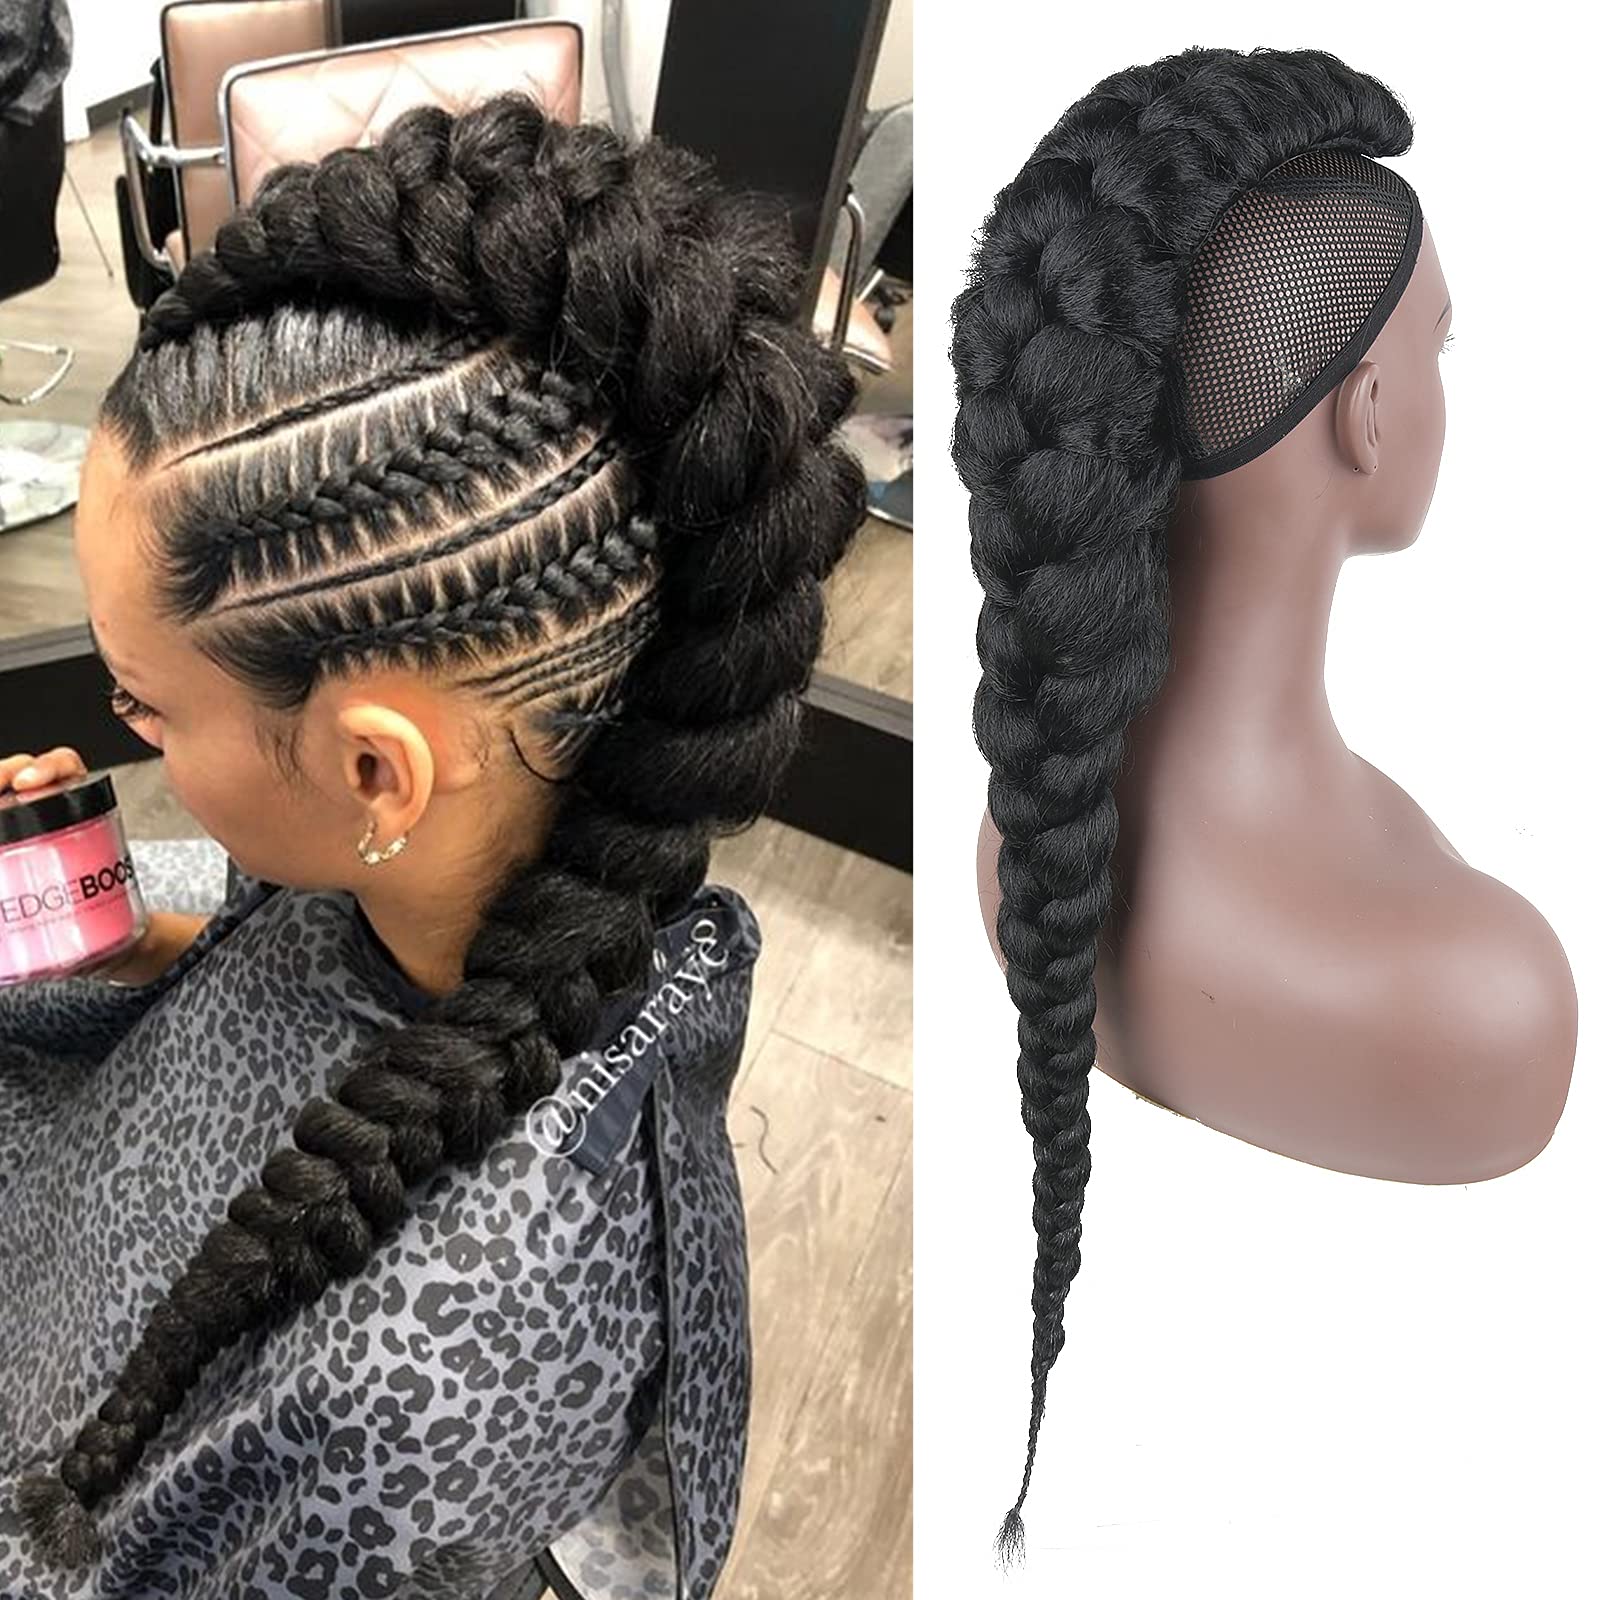 42+ Passion Twists, Spring Twist, and Braided Hairstyles - Hello Bombshell!  | Short box braids hairstyles, Twist braid hairstyles, Girls hairstyles  braids